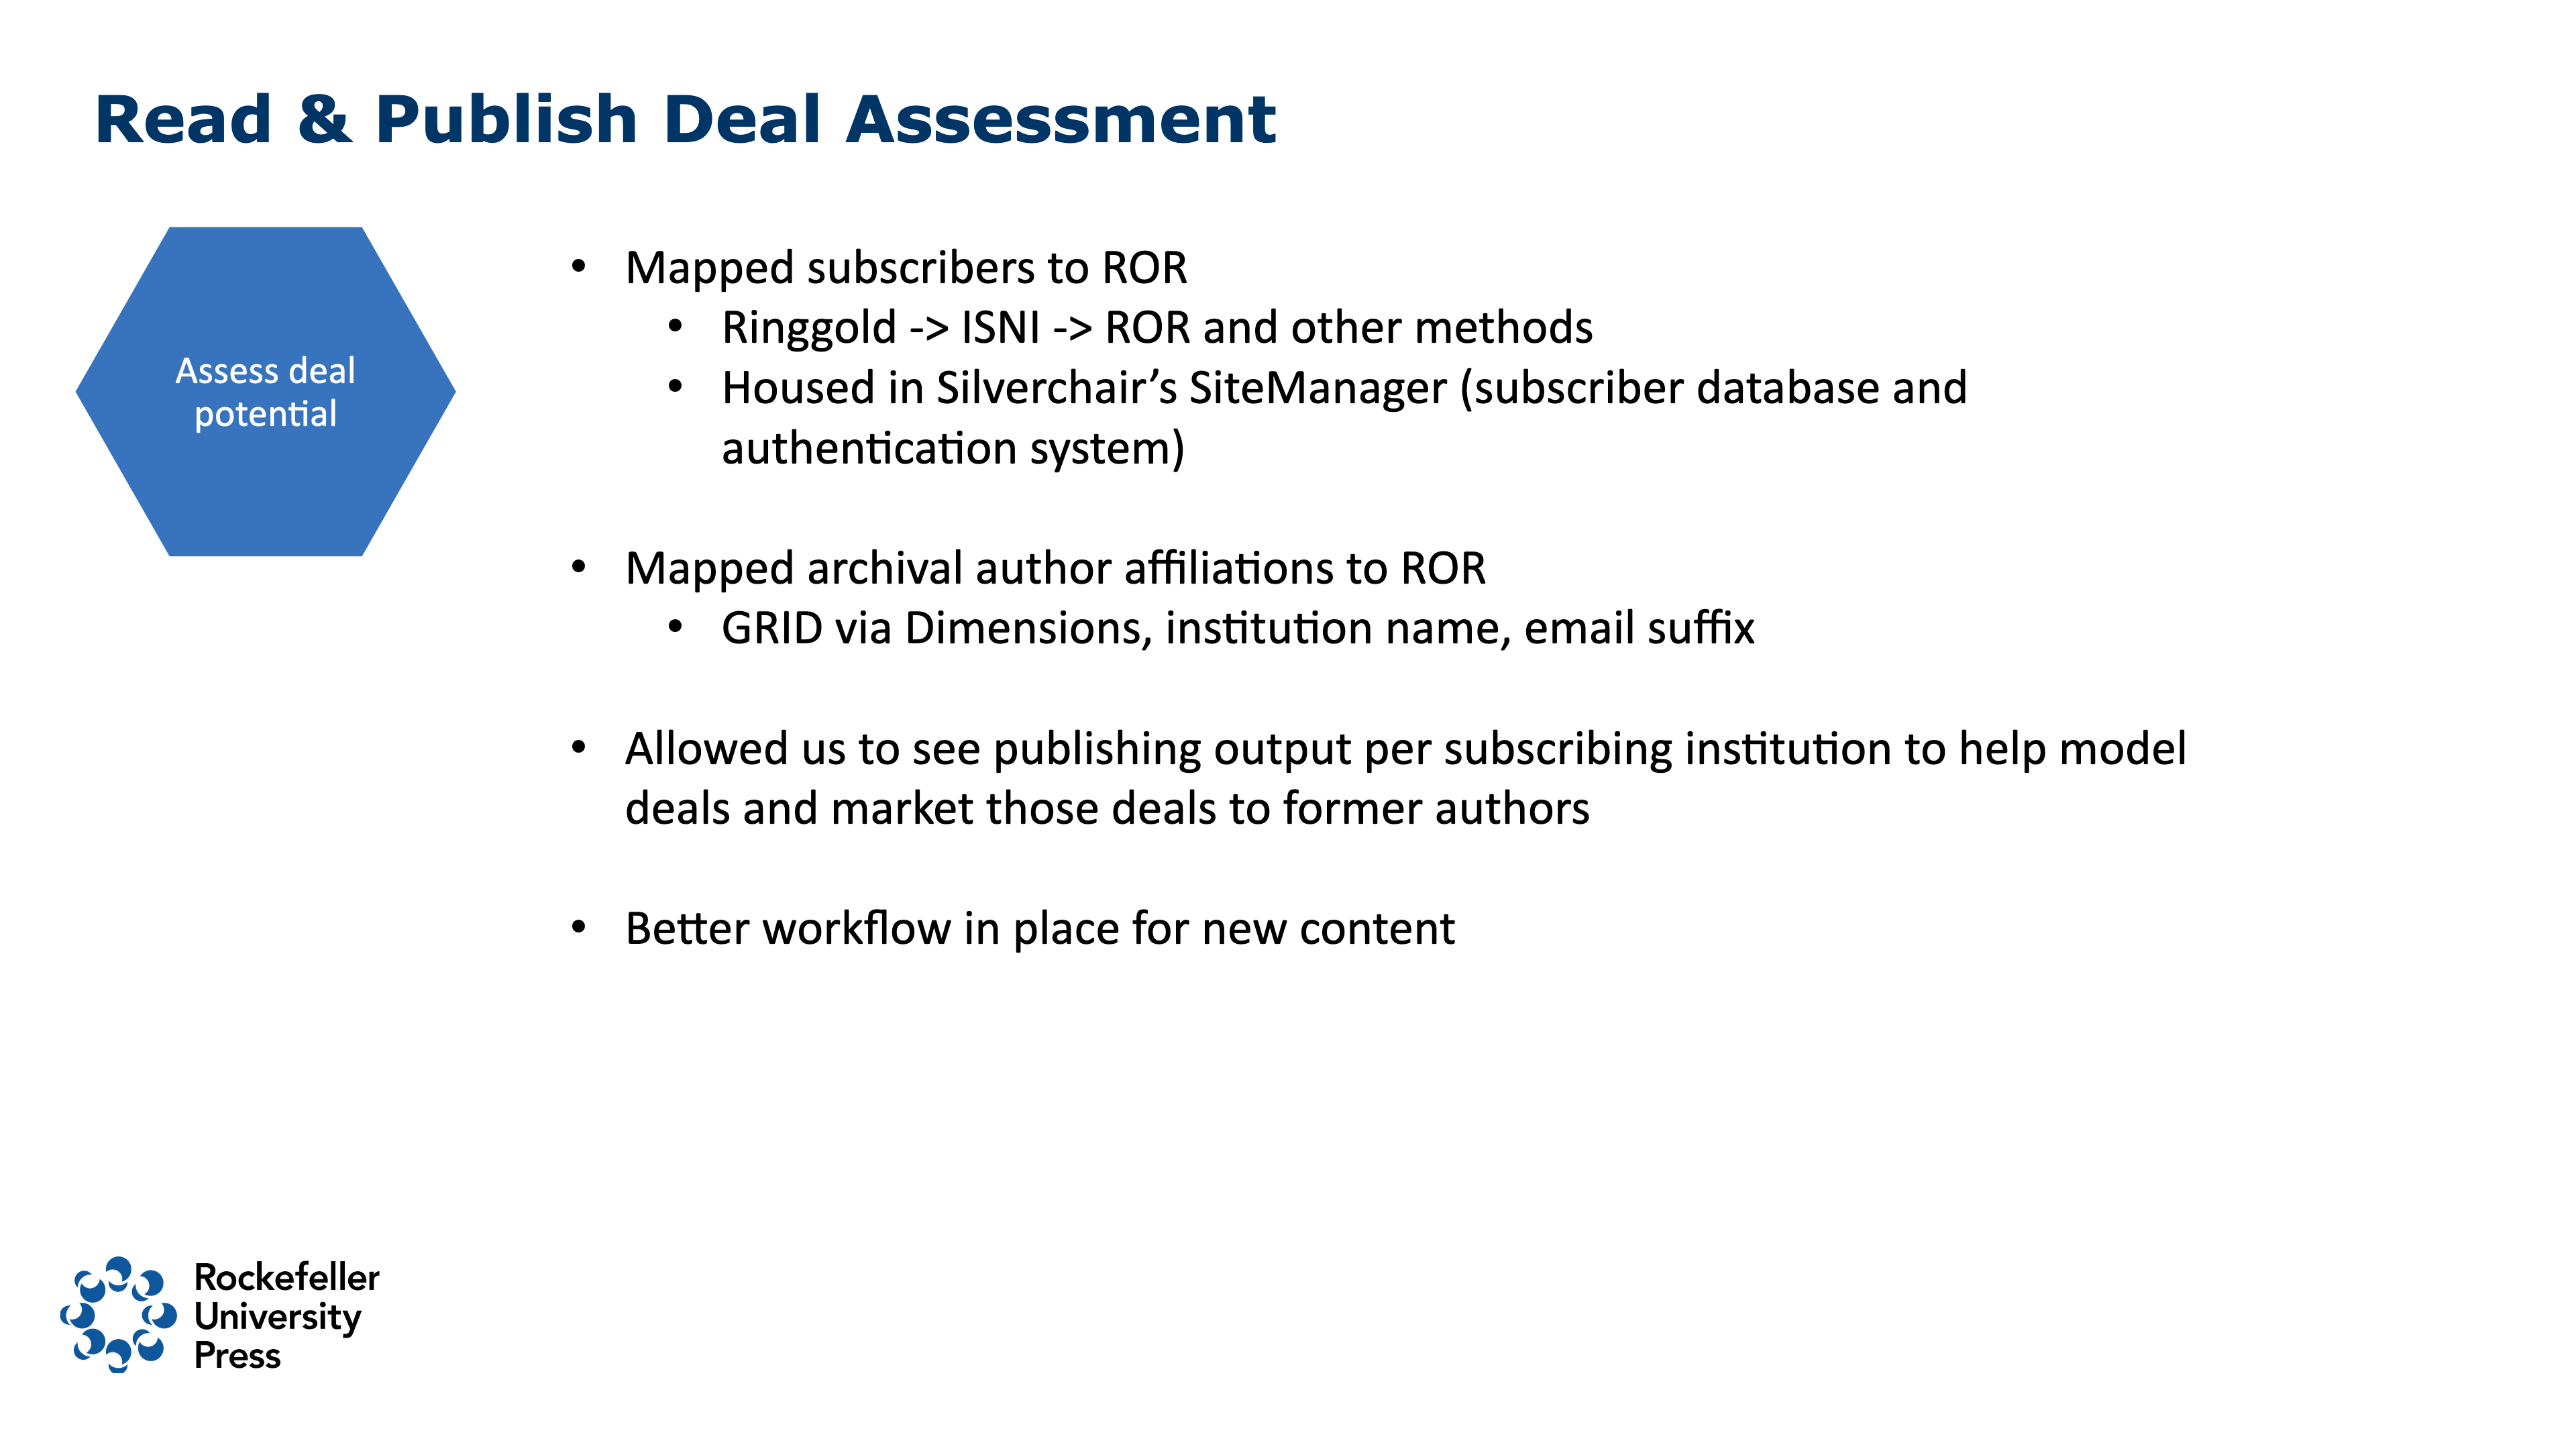 Read and Publish Deal Assessment: Mapped subscribers to ROR via Ringgold to ISNI to ROR, ROR IDs housed in Silverchair’s SiteManager, mapped archival author affiliations to ROR, mapped GRID via Dimensions and institution name and email suffix, allowed us to see publishing output per subscribing institution to help model deals and market those deals to former authors, enabled better workflow in place for new content